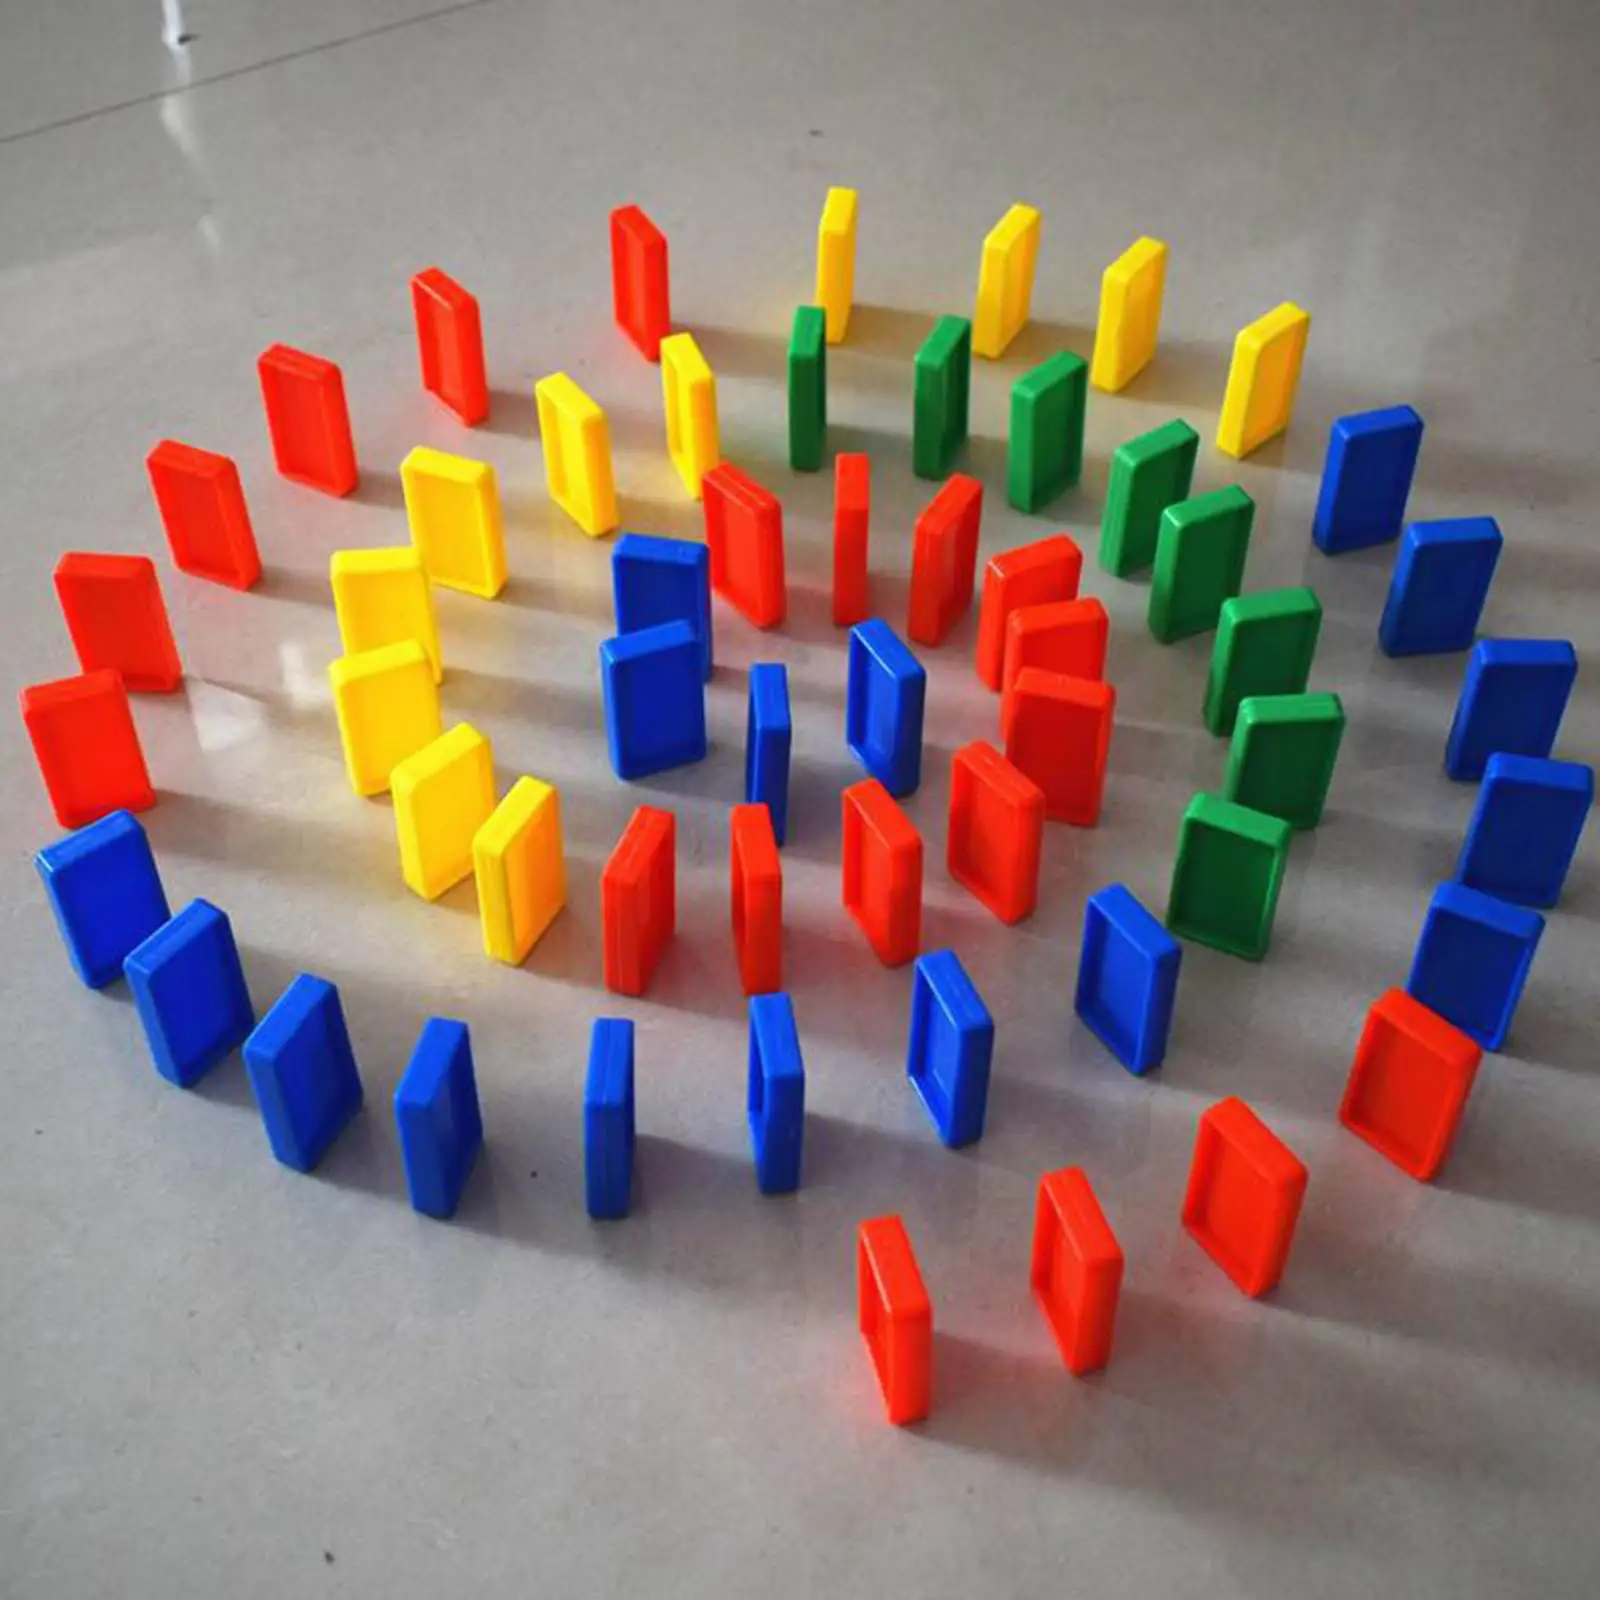 100x Colorful Dominoes Blocks Building Stacking Game Family Games for Kids Girls Boys Toddler Creative Gifts